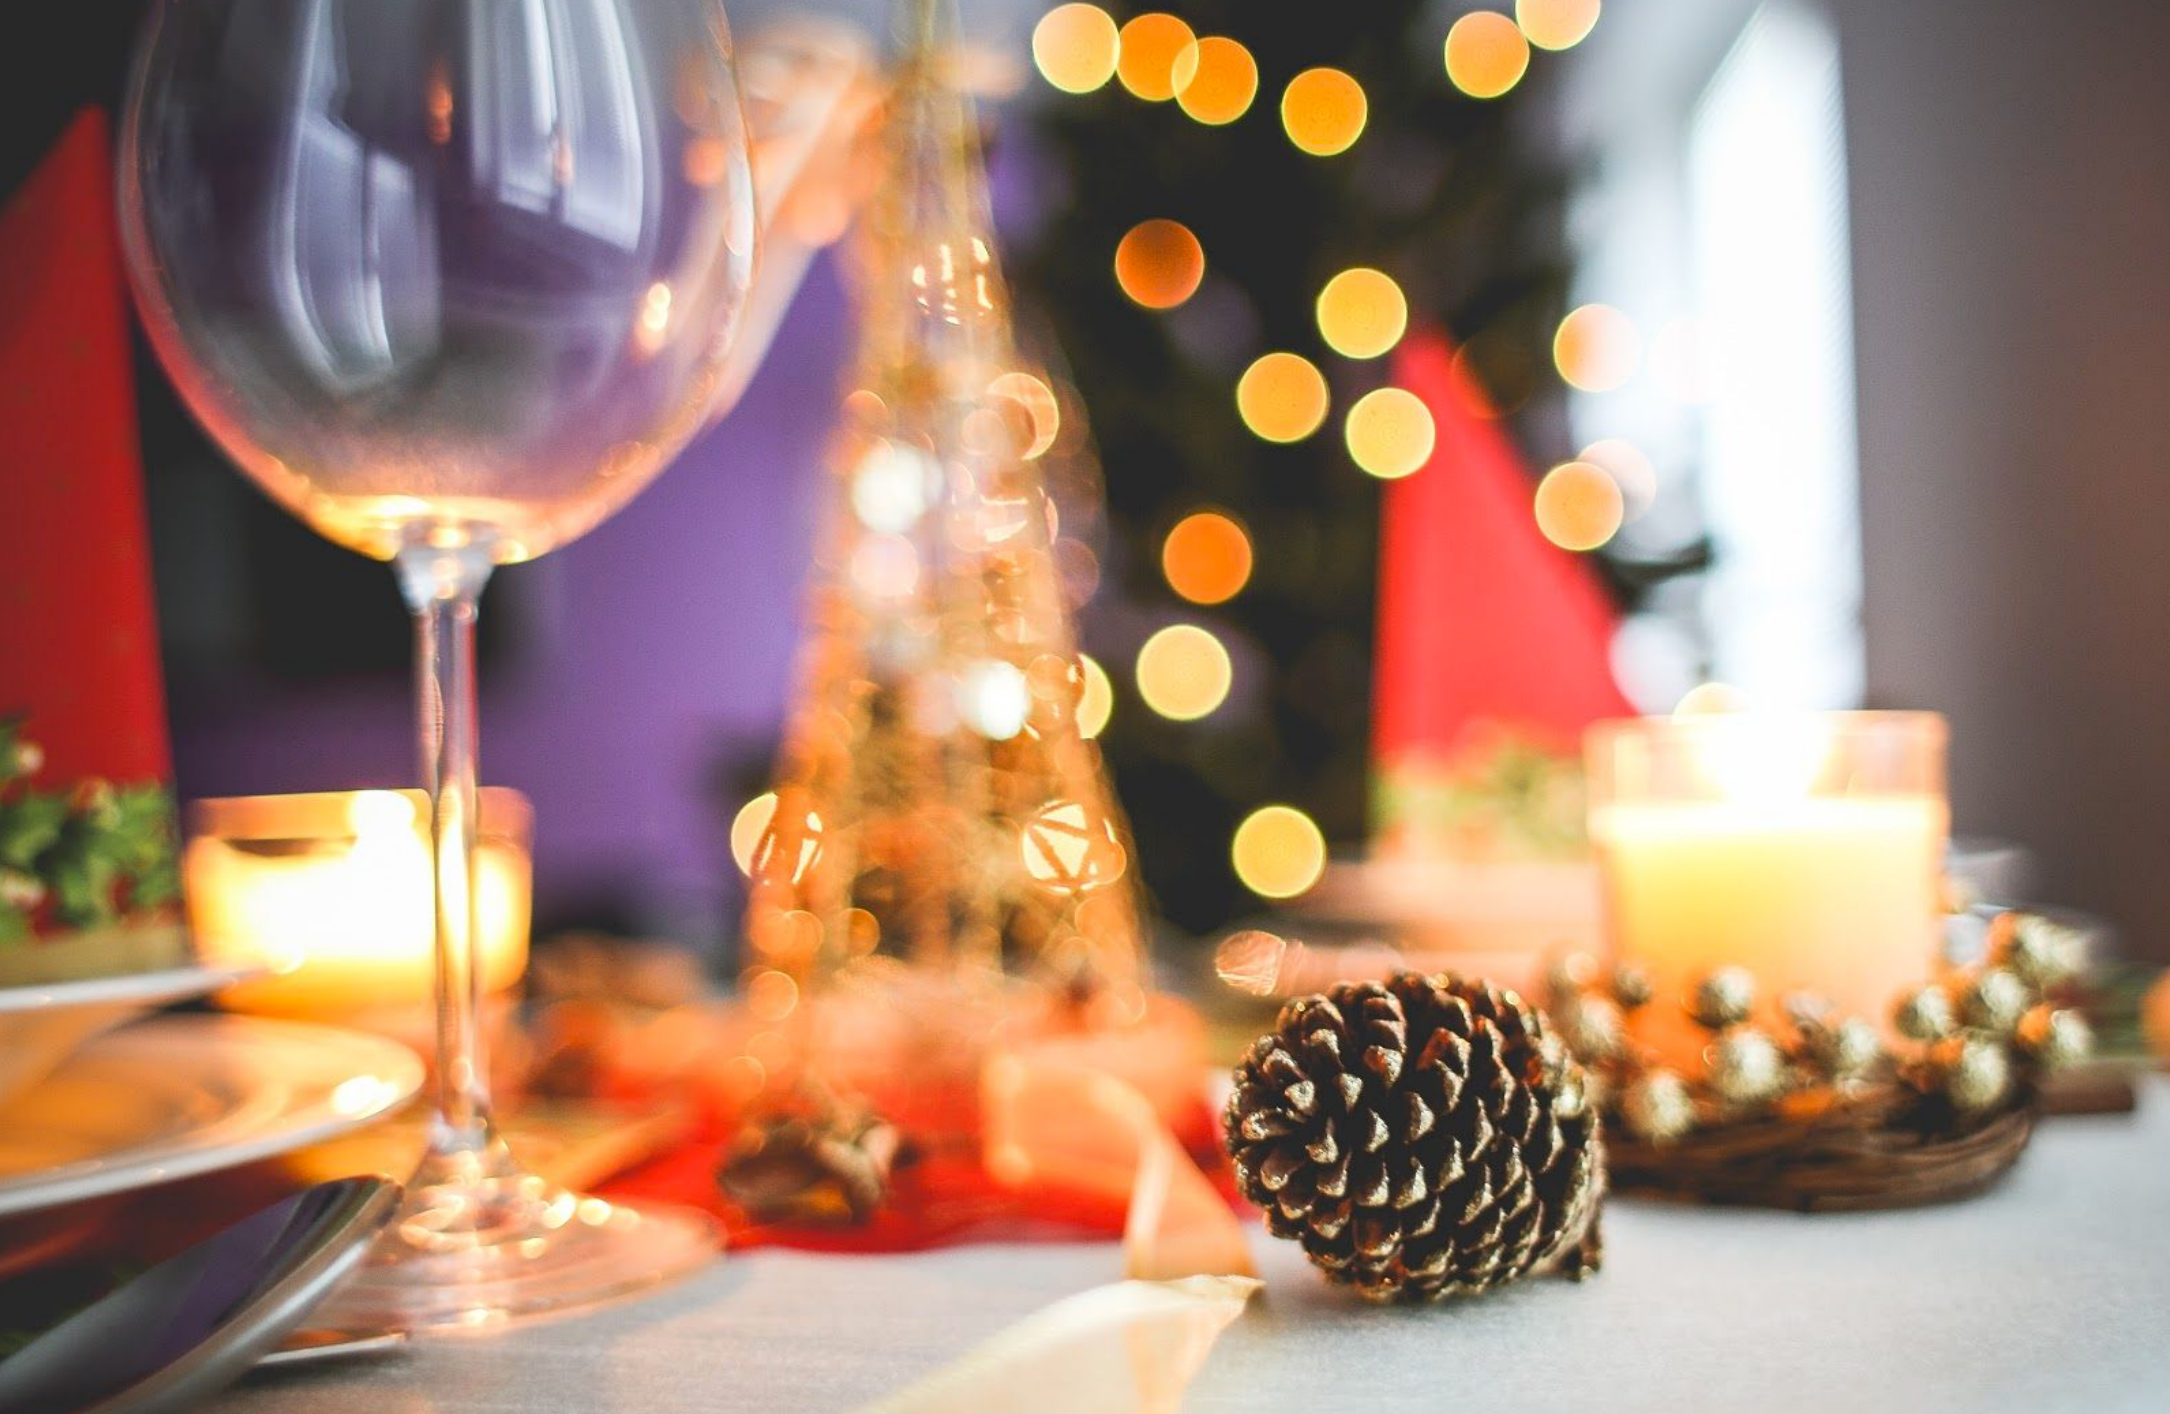 5 Tips for Throwing a Holiday Party...And Keeping Your In-Building Neighbors Happy!